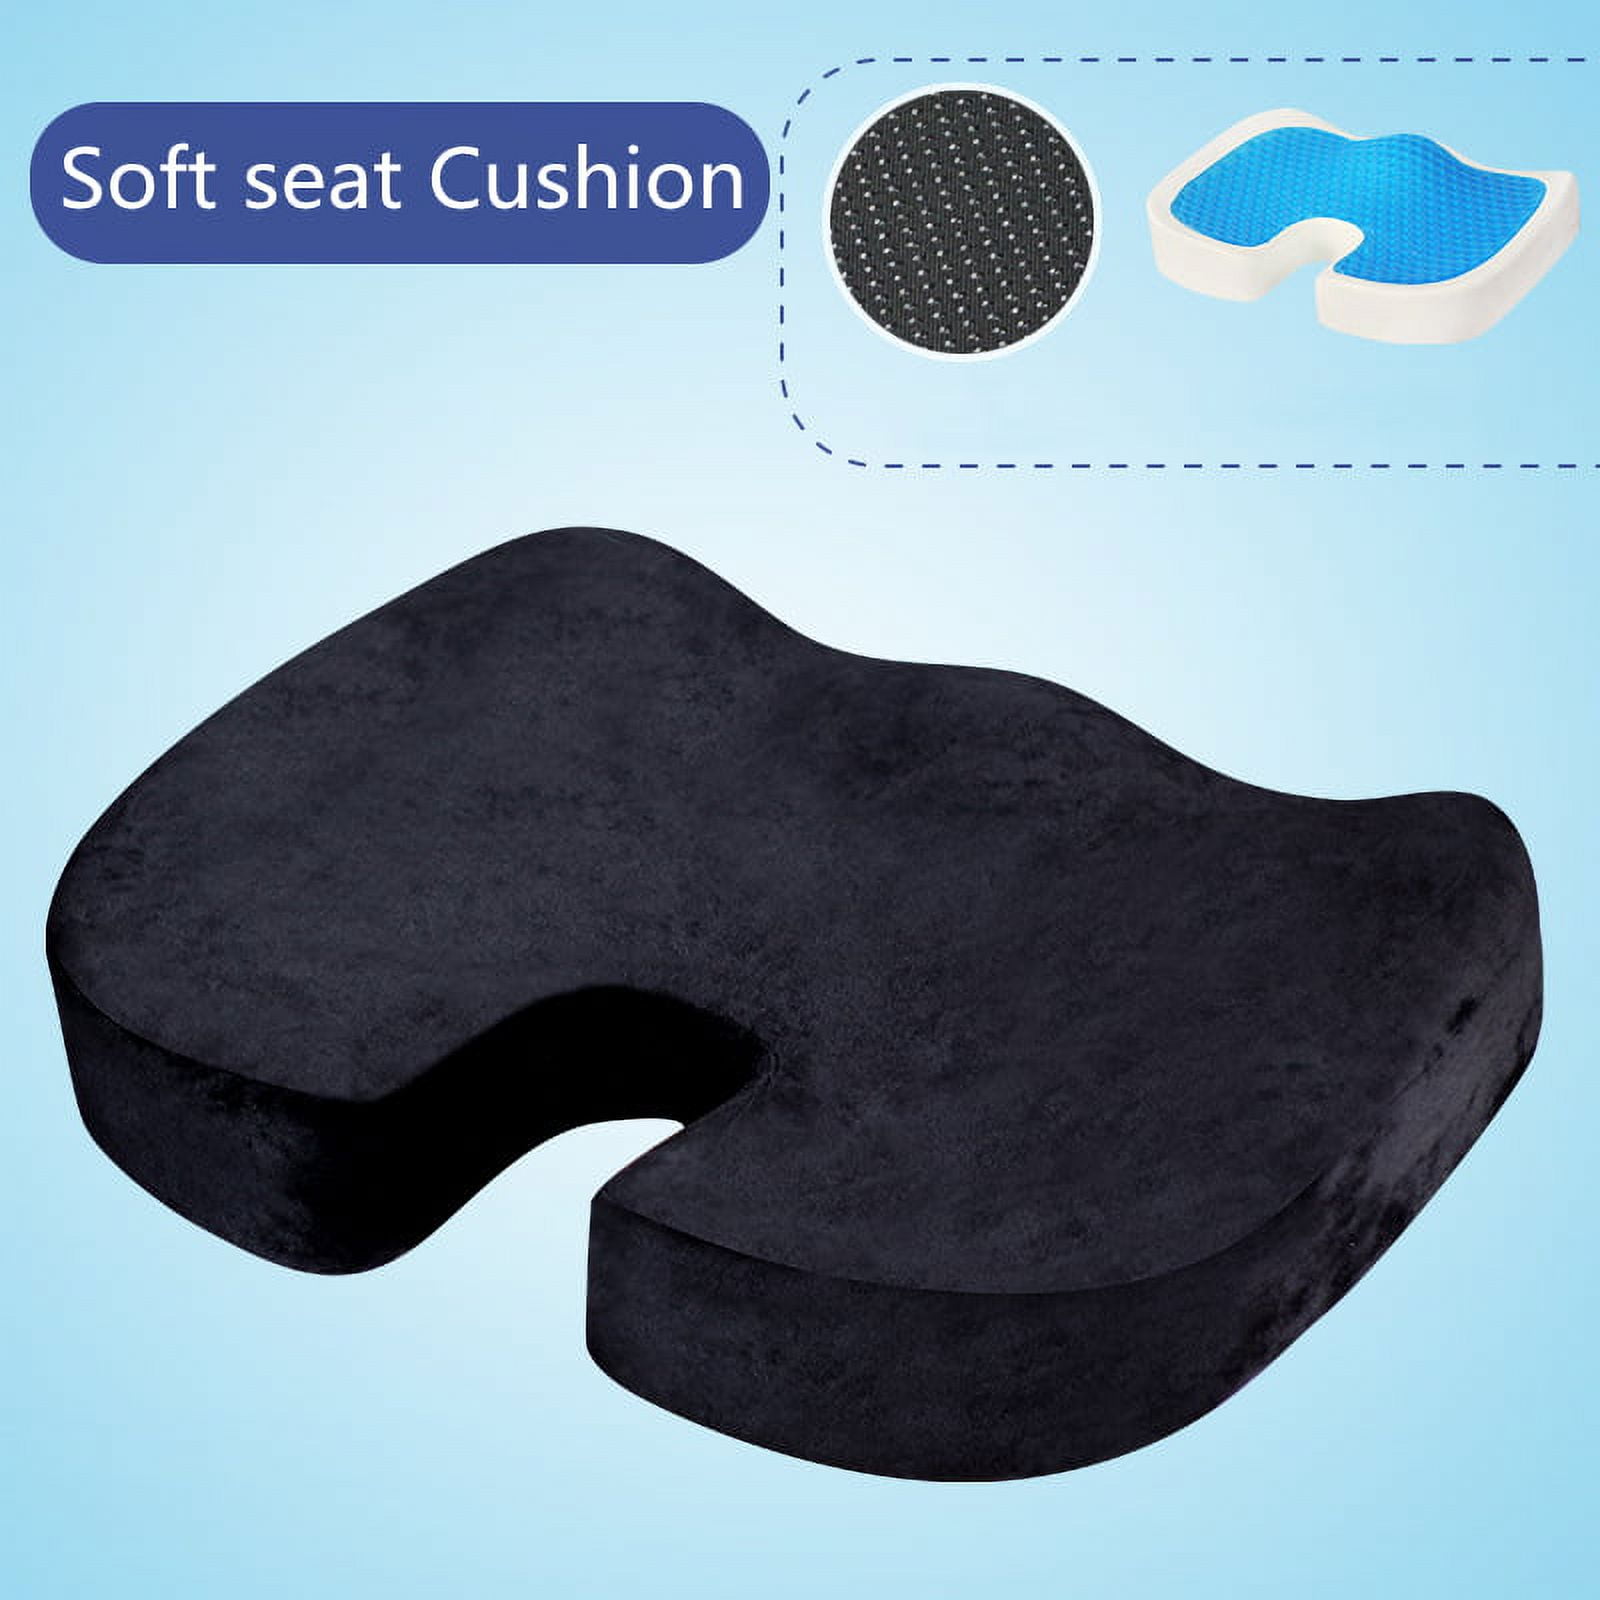 Get the ComfiLife Gel Enhanced Seat Cushion for Your Office Chair